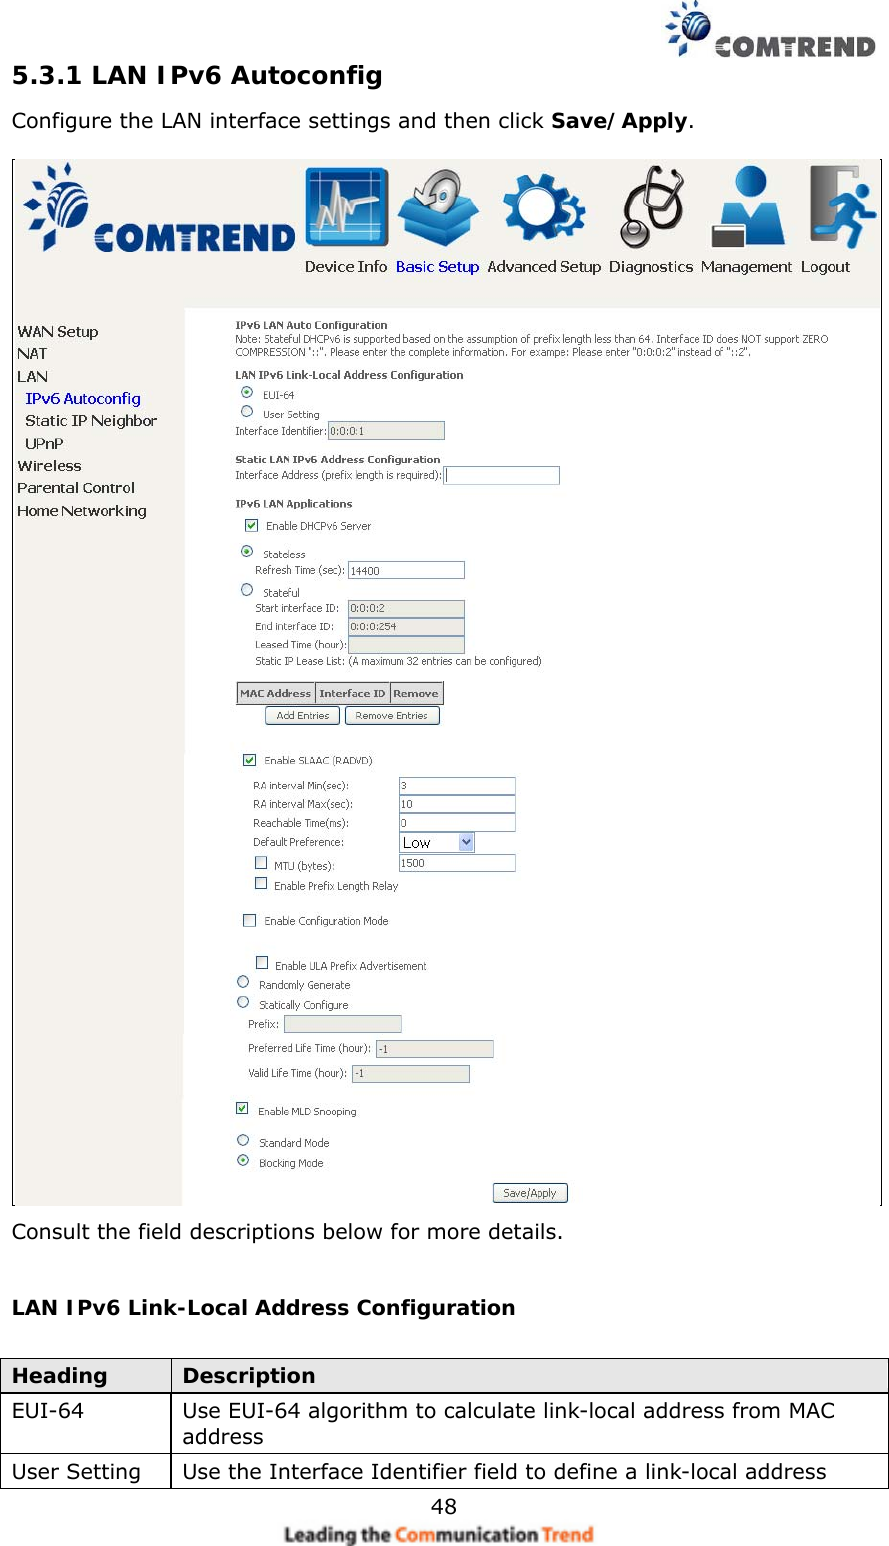    485.3.1 LAN IPv6 Autoconfig Configure the LAN interface settings and then click Save/Apply.   Consult the field descriptions below for more details.  LAN IPv6 Link-Local Address Configuration  Heading  Description EUI-64  Use EUI-64 algorithm to calculate link-local address from MAC address User Setting  Use the Interface Identifier field to define a link-local address 